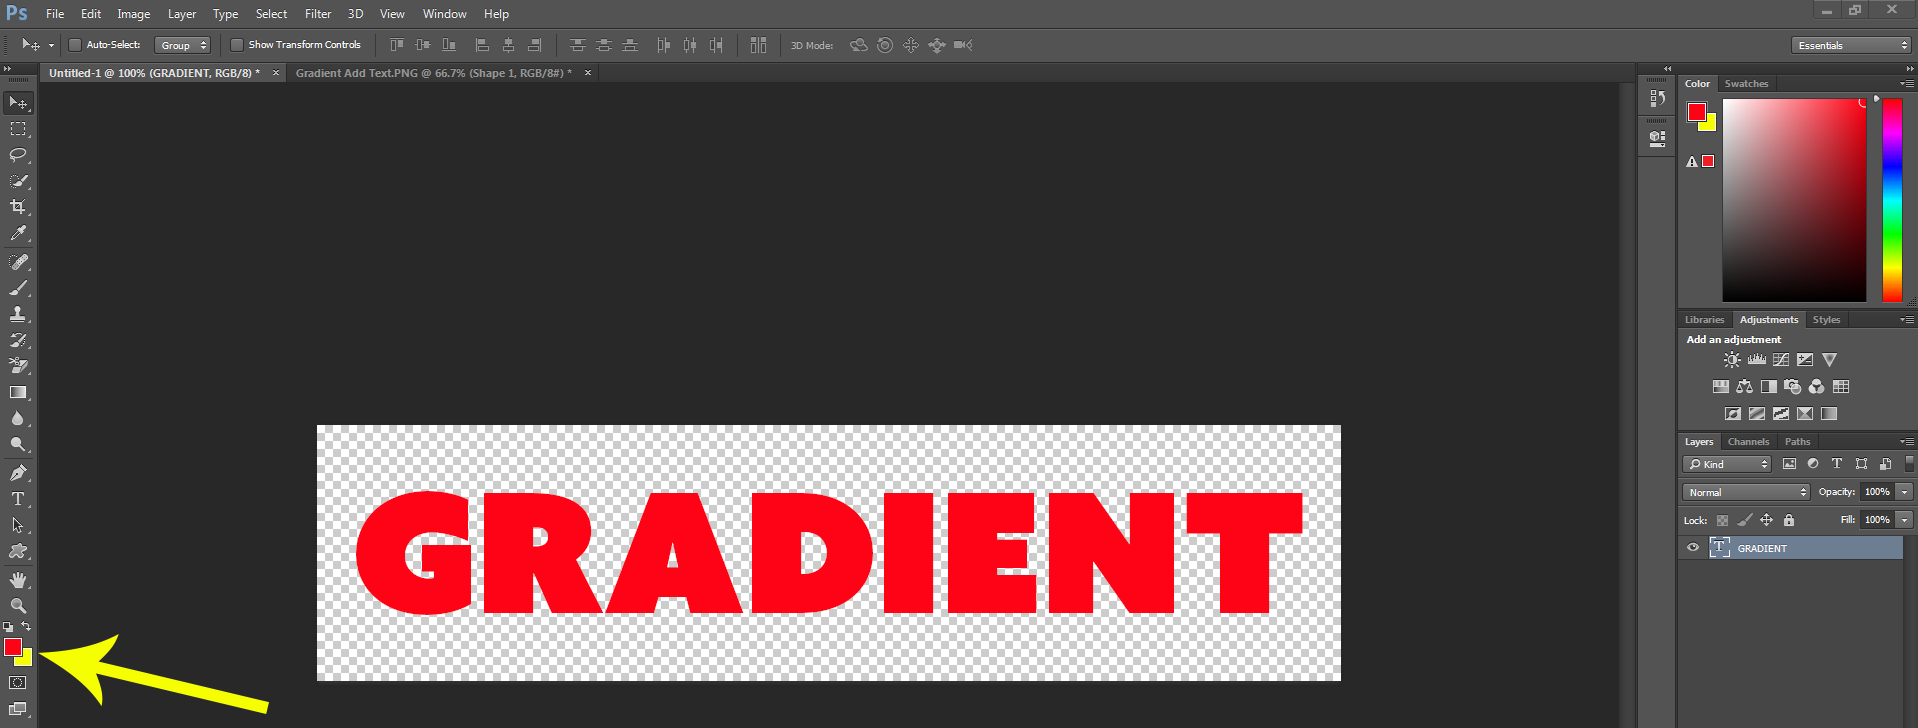 How to Make Gradient Text (PhotoShop Tutorial) | chrismcmullen